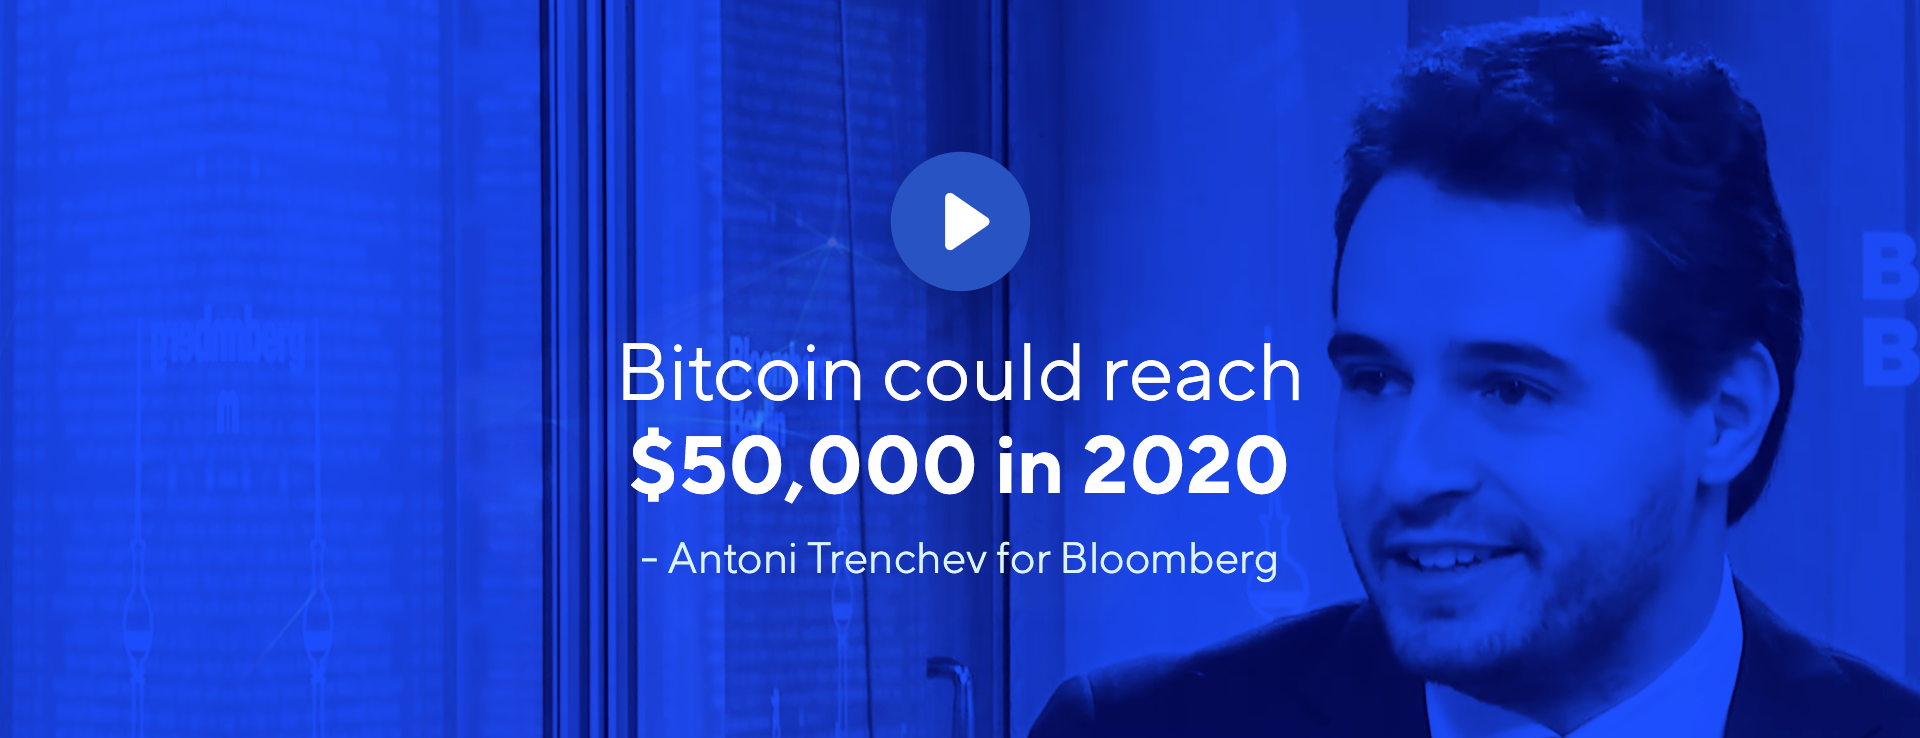 Bitcoin Could Reach $50,000 in 2020, Says Nexo’s Antoni Trenchev on Bloomberg